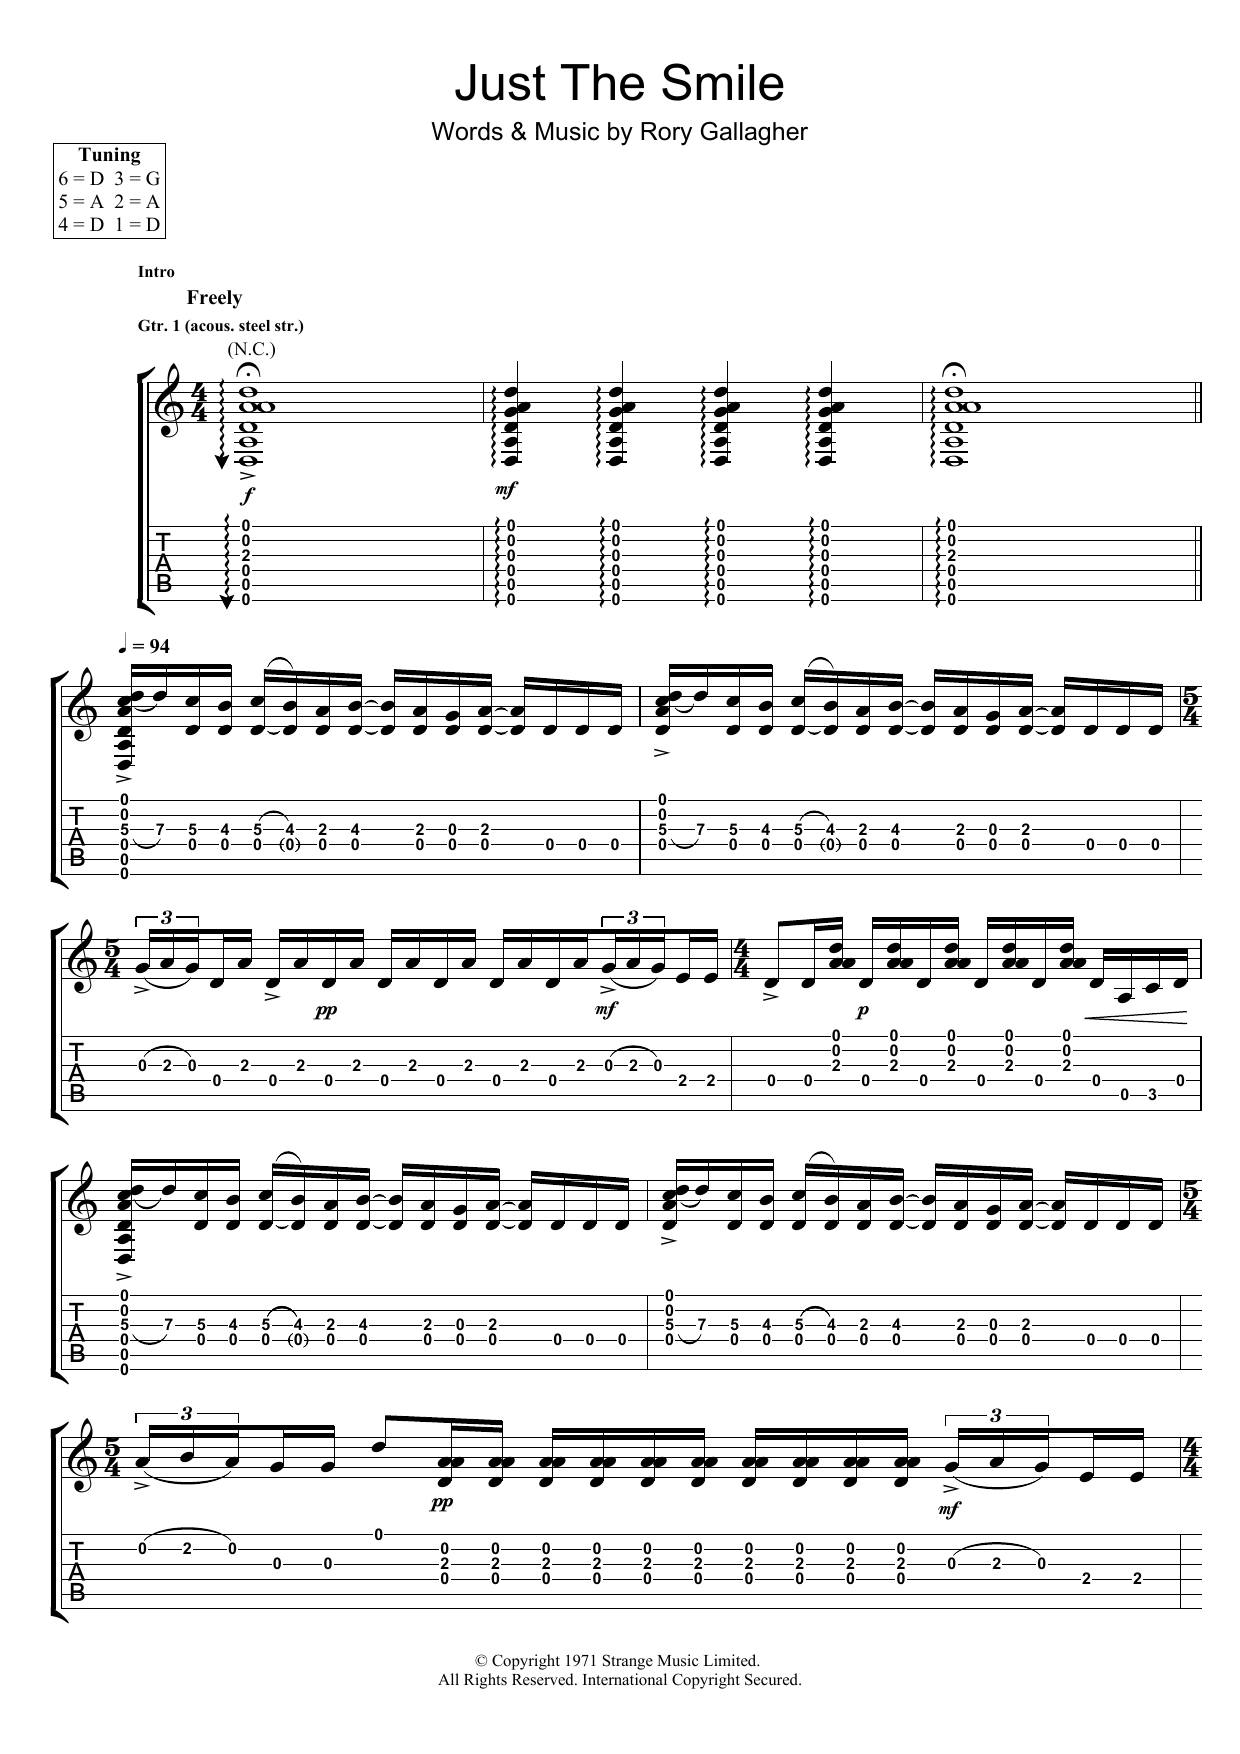 Download Rory Gallagher Just The Smile Sheet Music